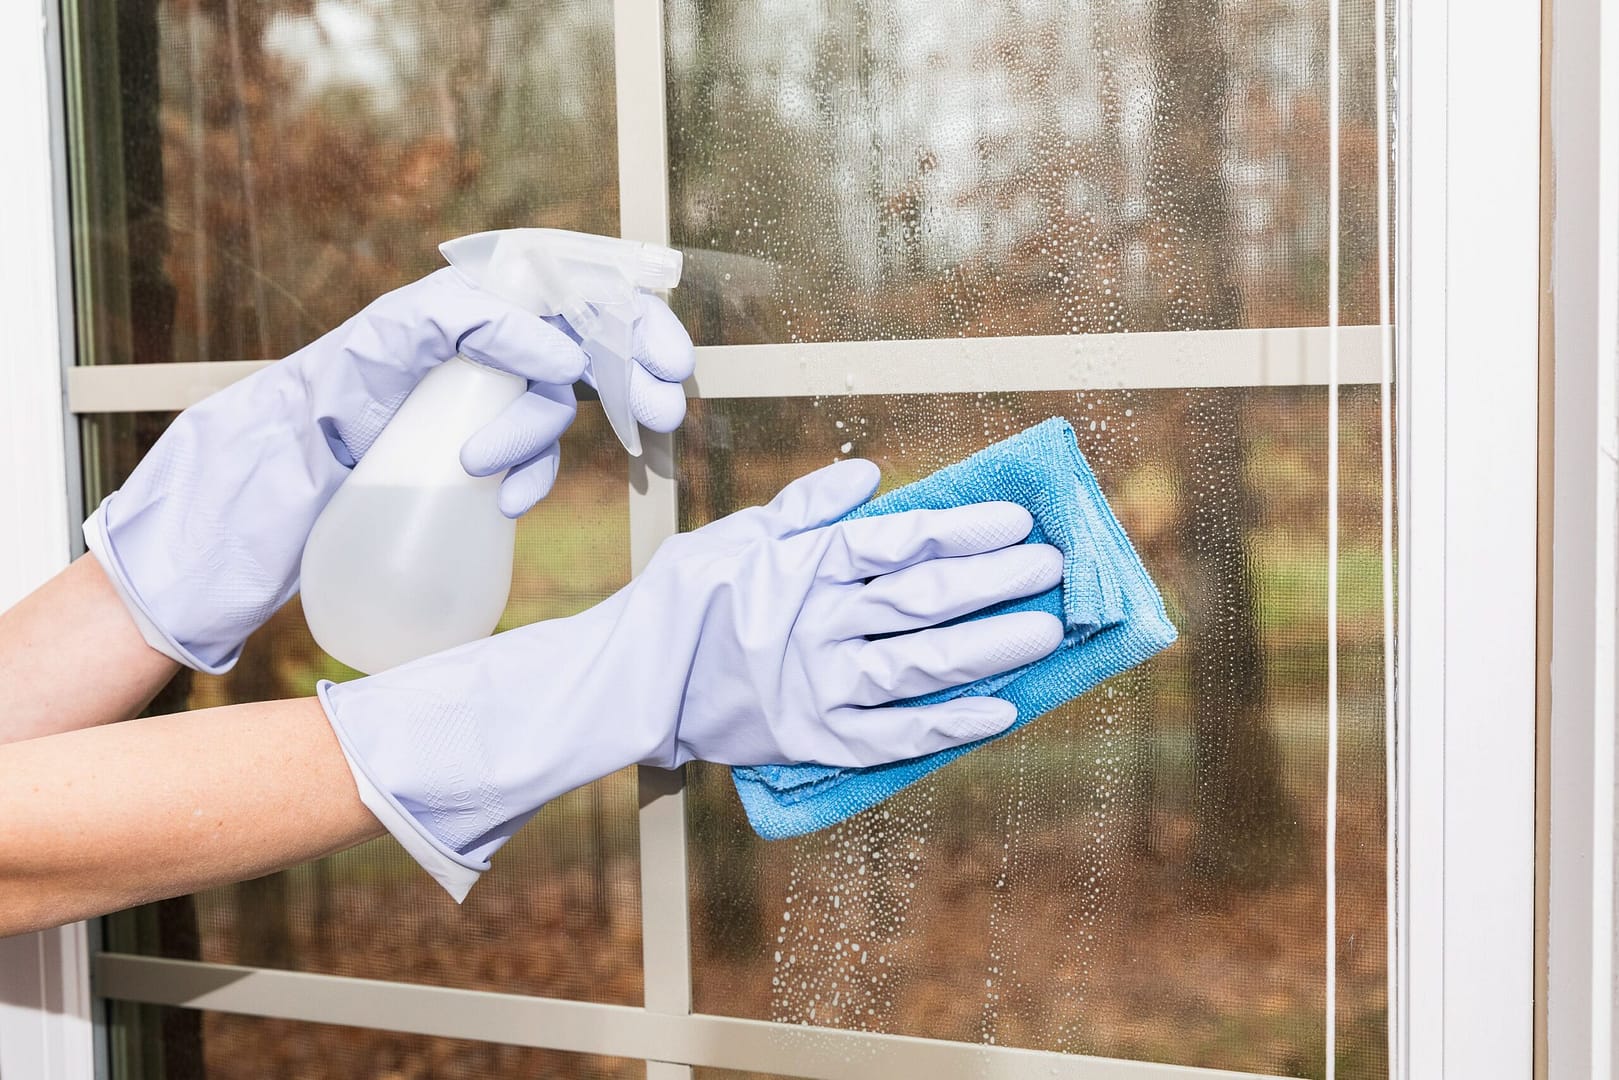 Person using a spray bottle to apply cleaning solution on the outside of a window, followed by wiping it clean with a cloth.